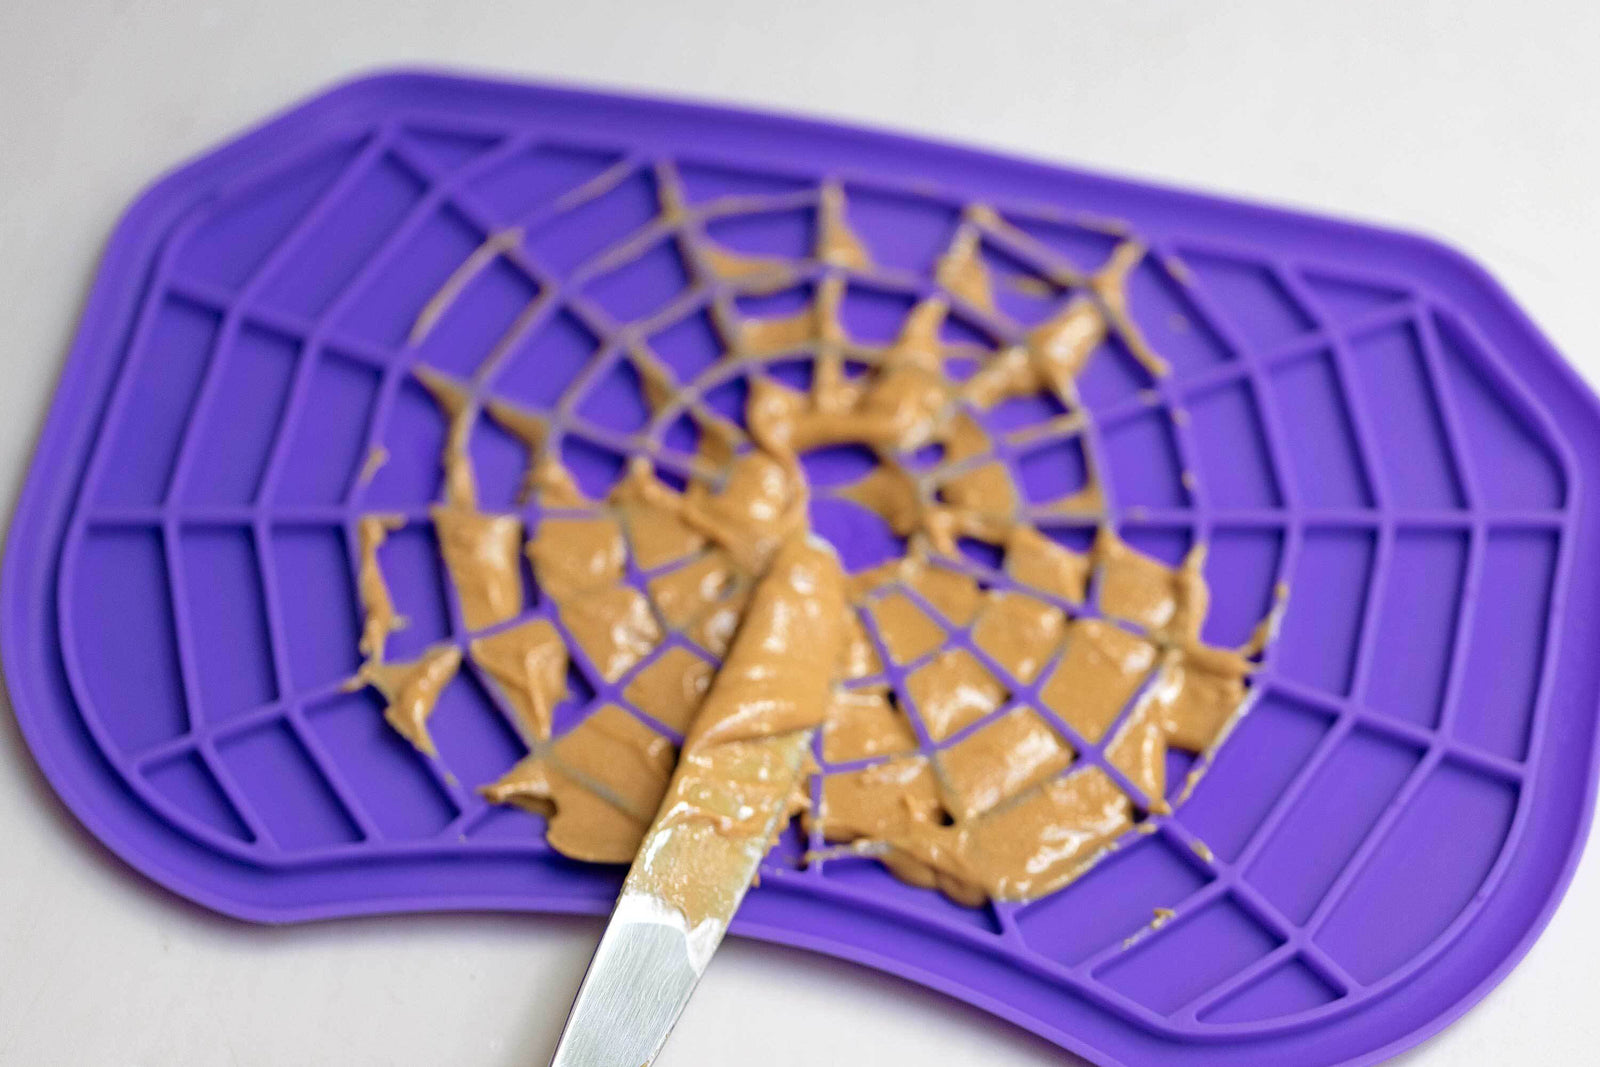 8 Tasty Treat Suggestions for the Neat-Lik Mat